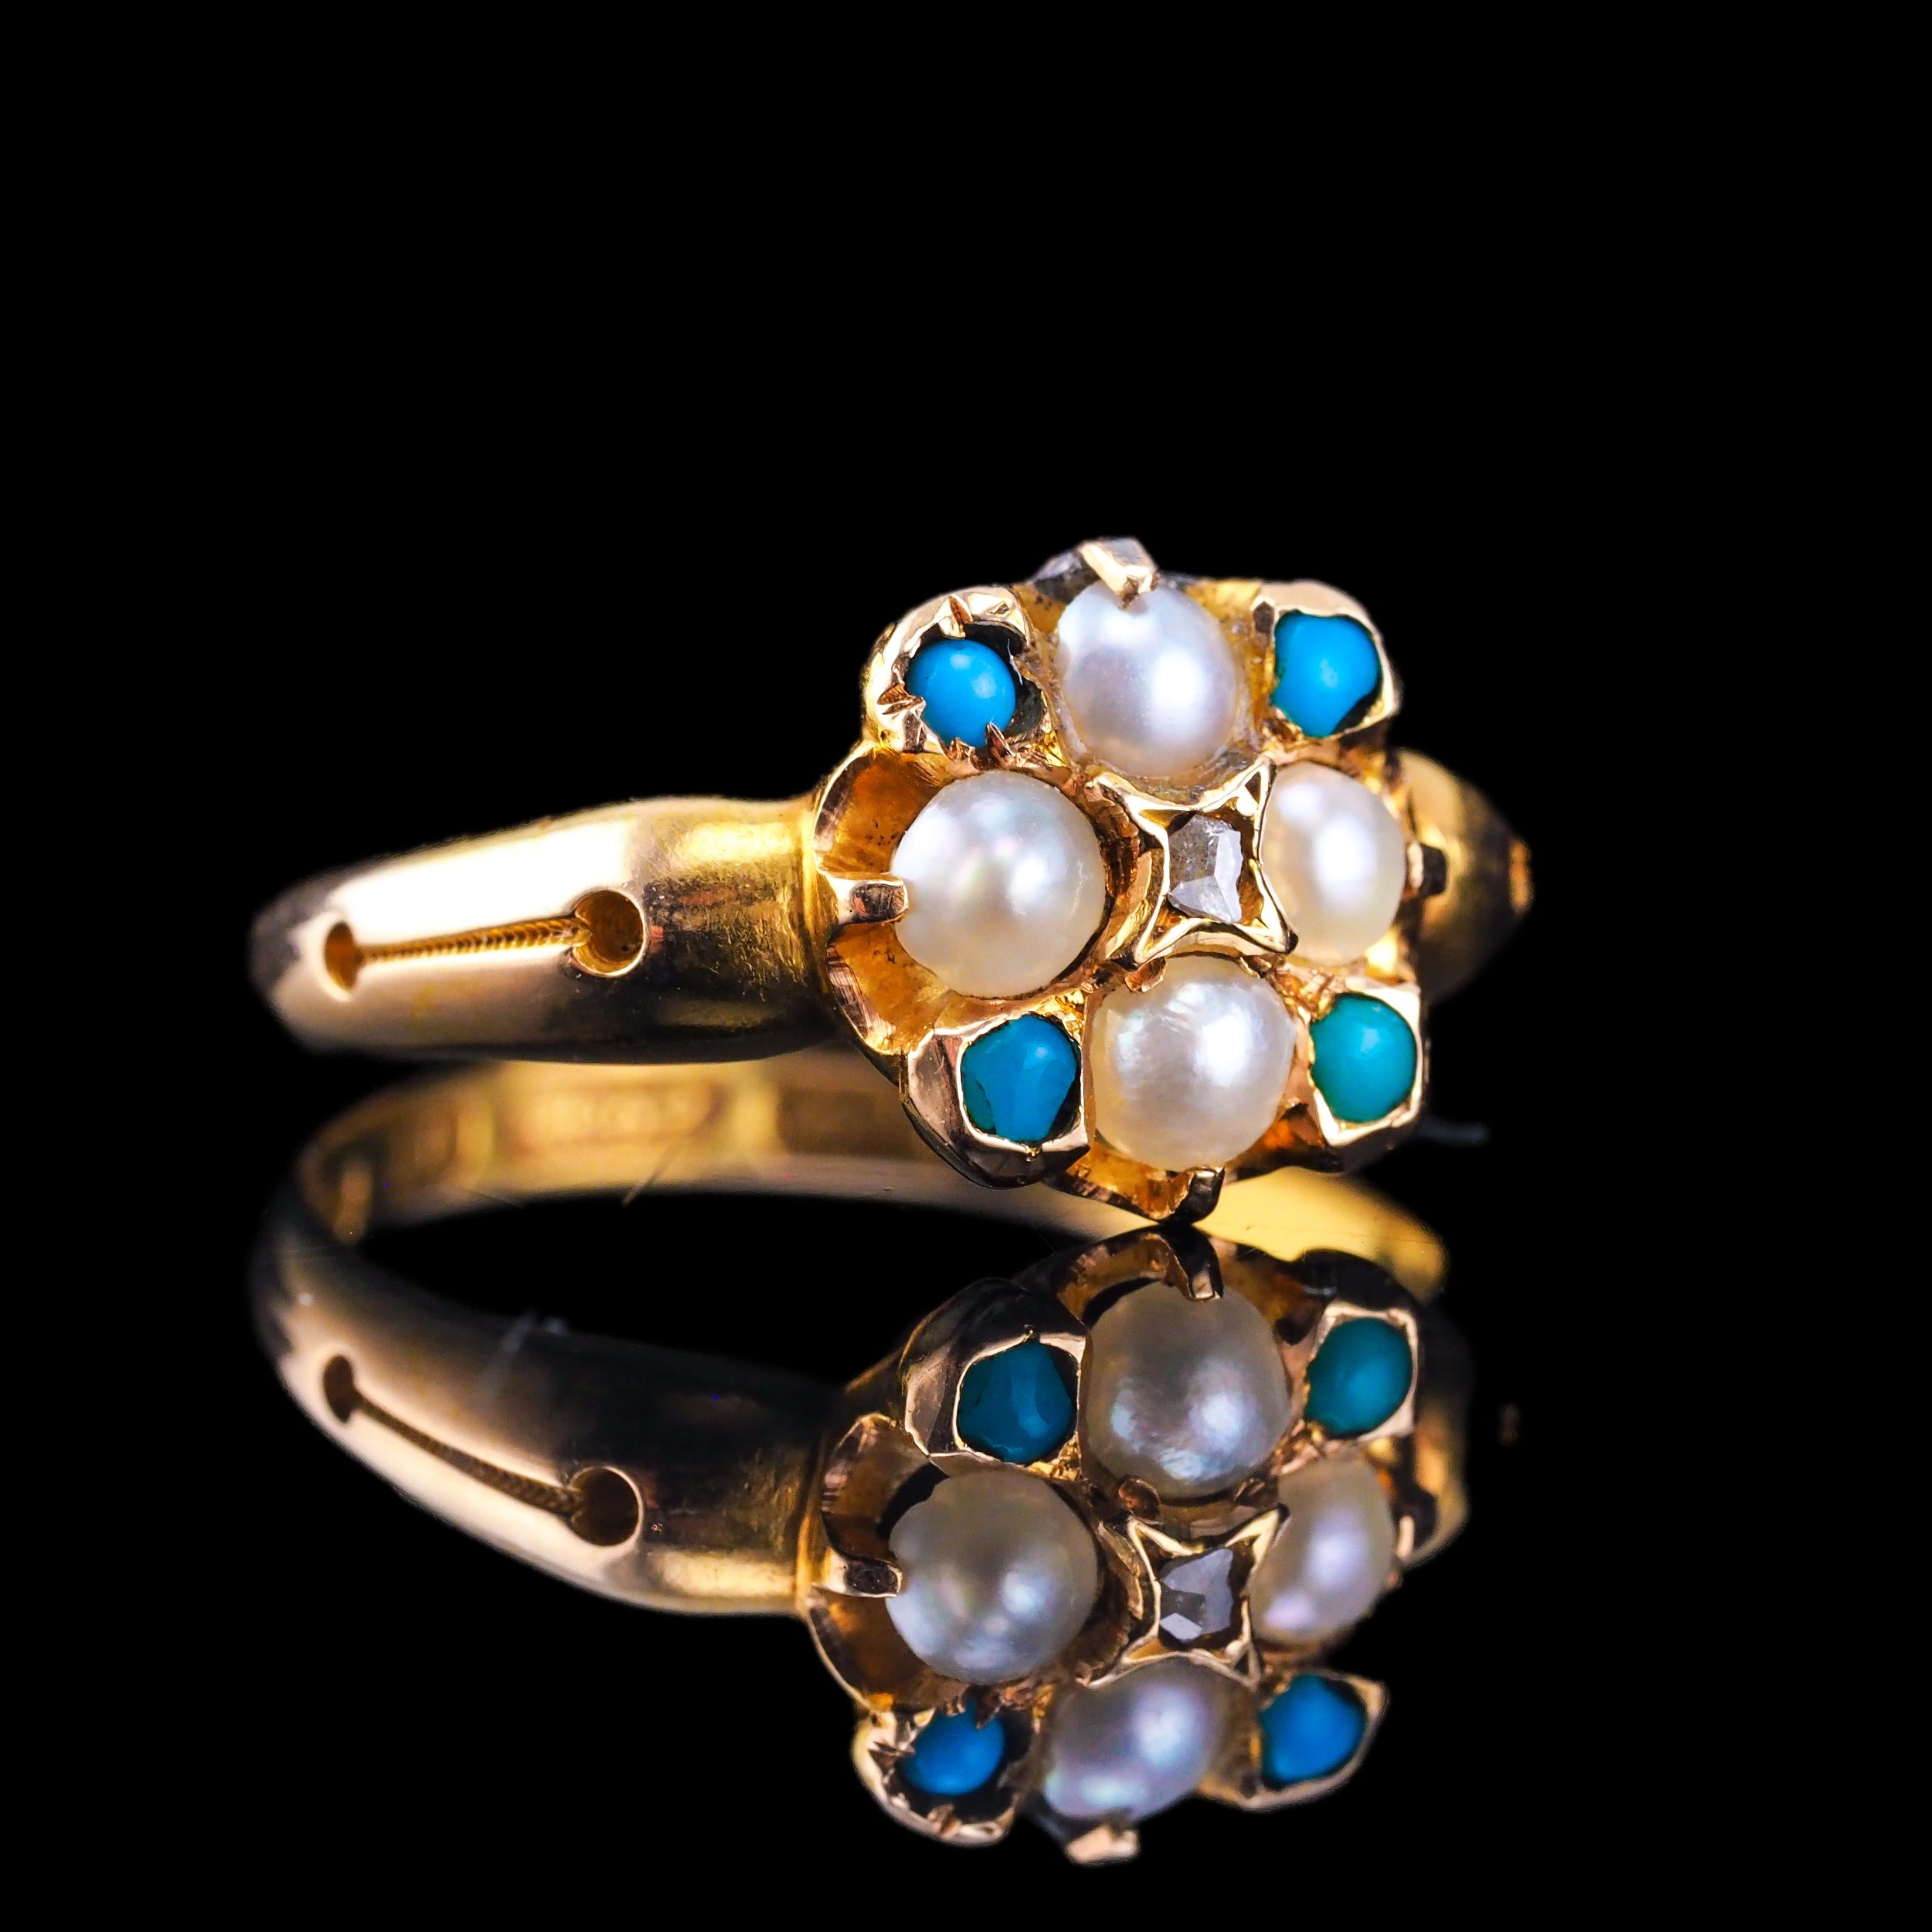 We are delighted to offer this fabulous antique Victorian ring made in Birmingham in 1897.

The ring features a charming flower cluster design at the top adorned with 4 turquoise gemstones, pearls and once central antique rose-cut diamond.

The gold